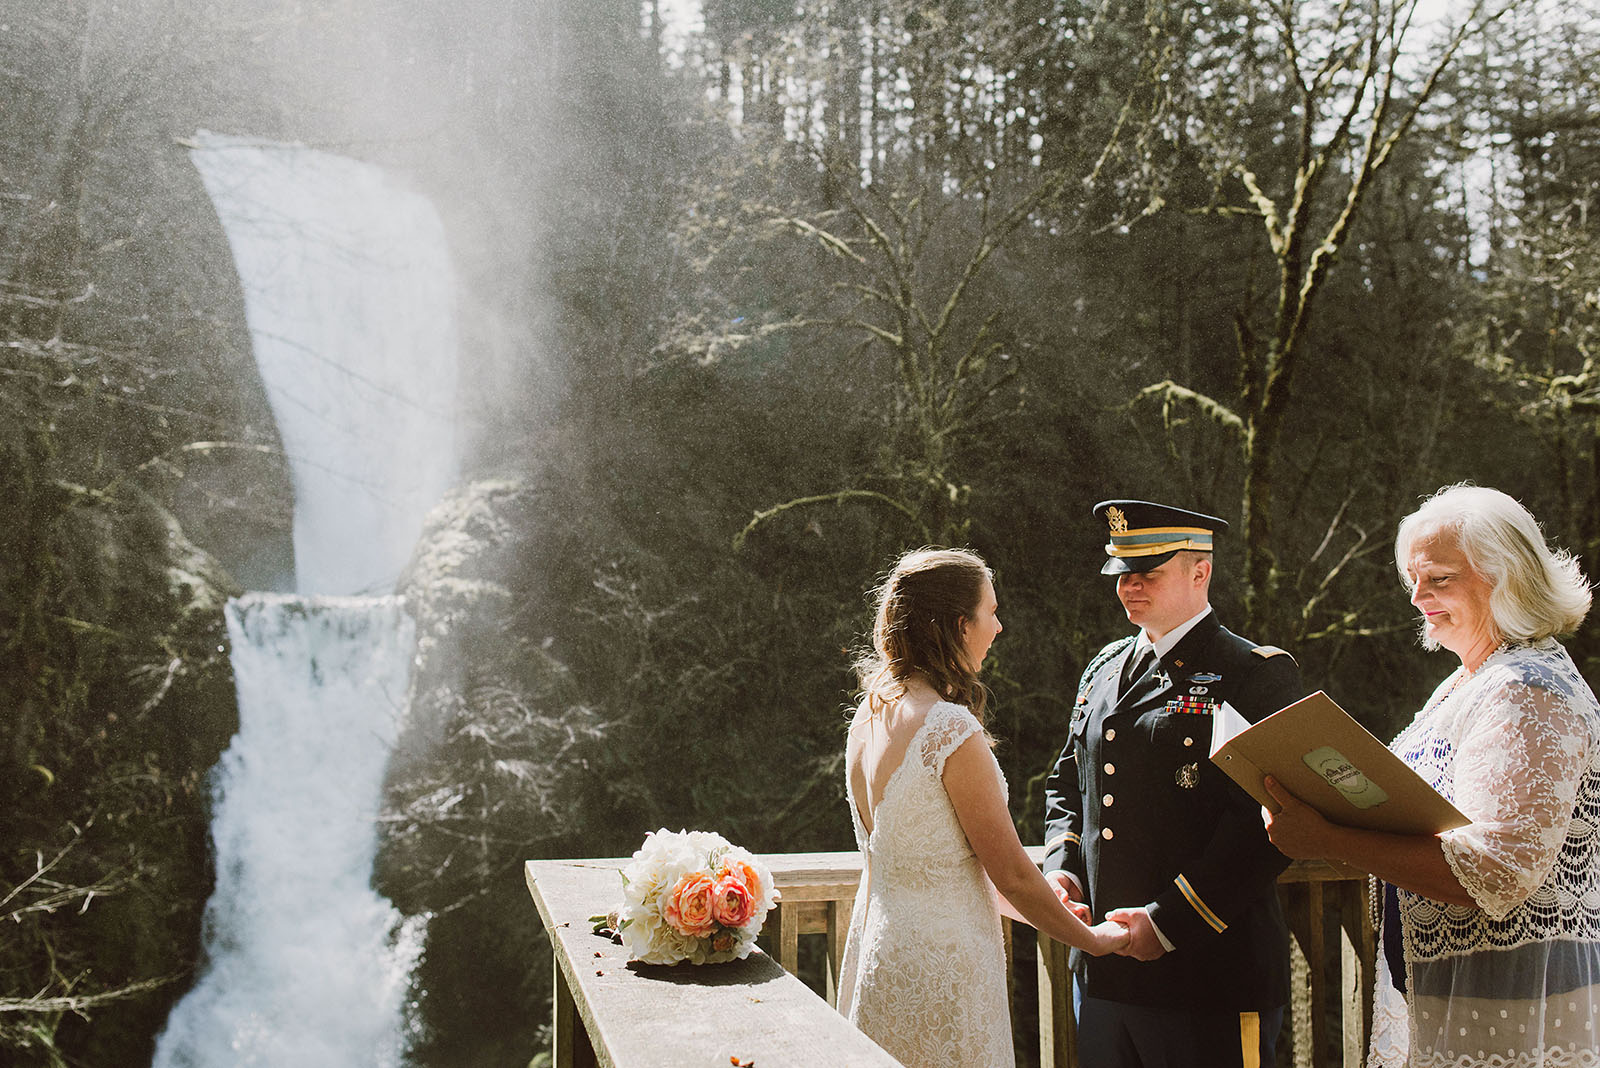 Wedding ceremony in front of a waterfall | Bridal Veil Elopement Photographer